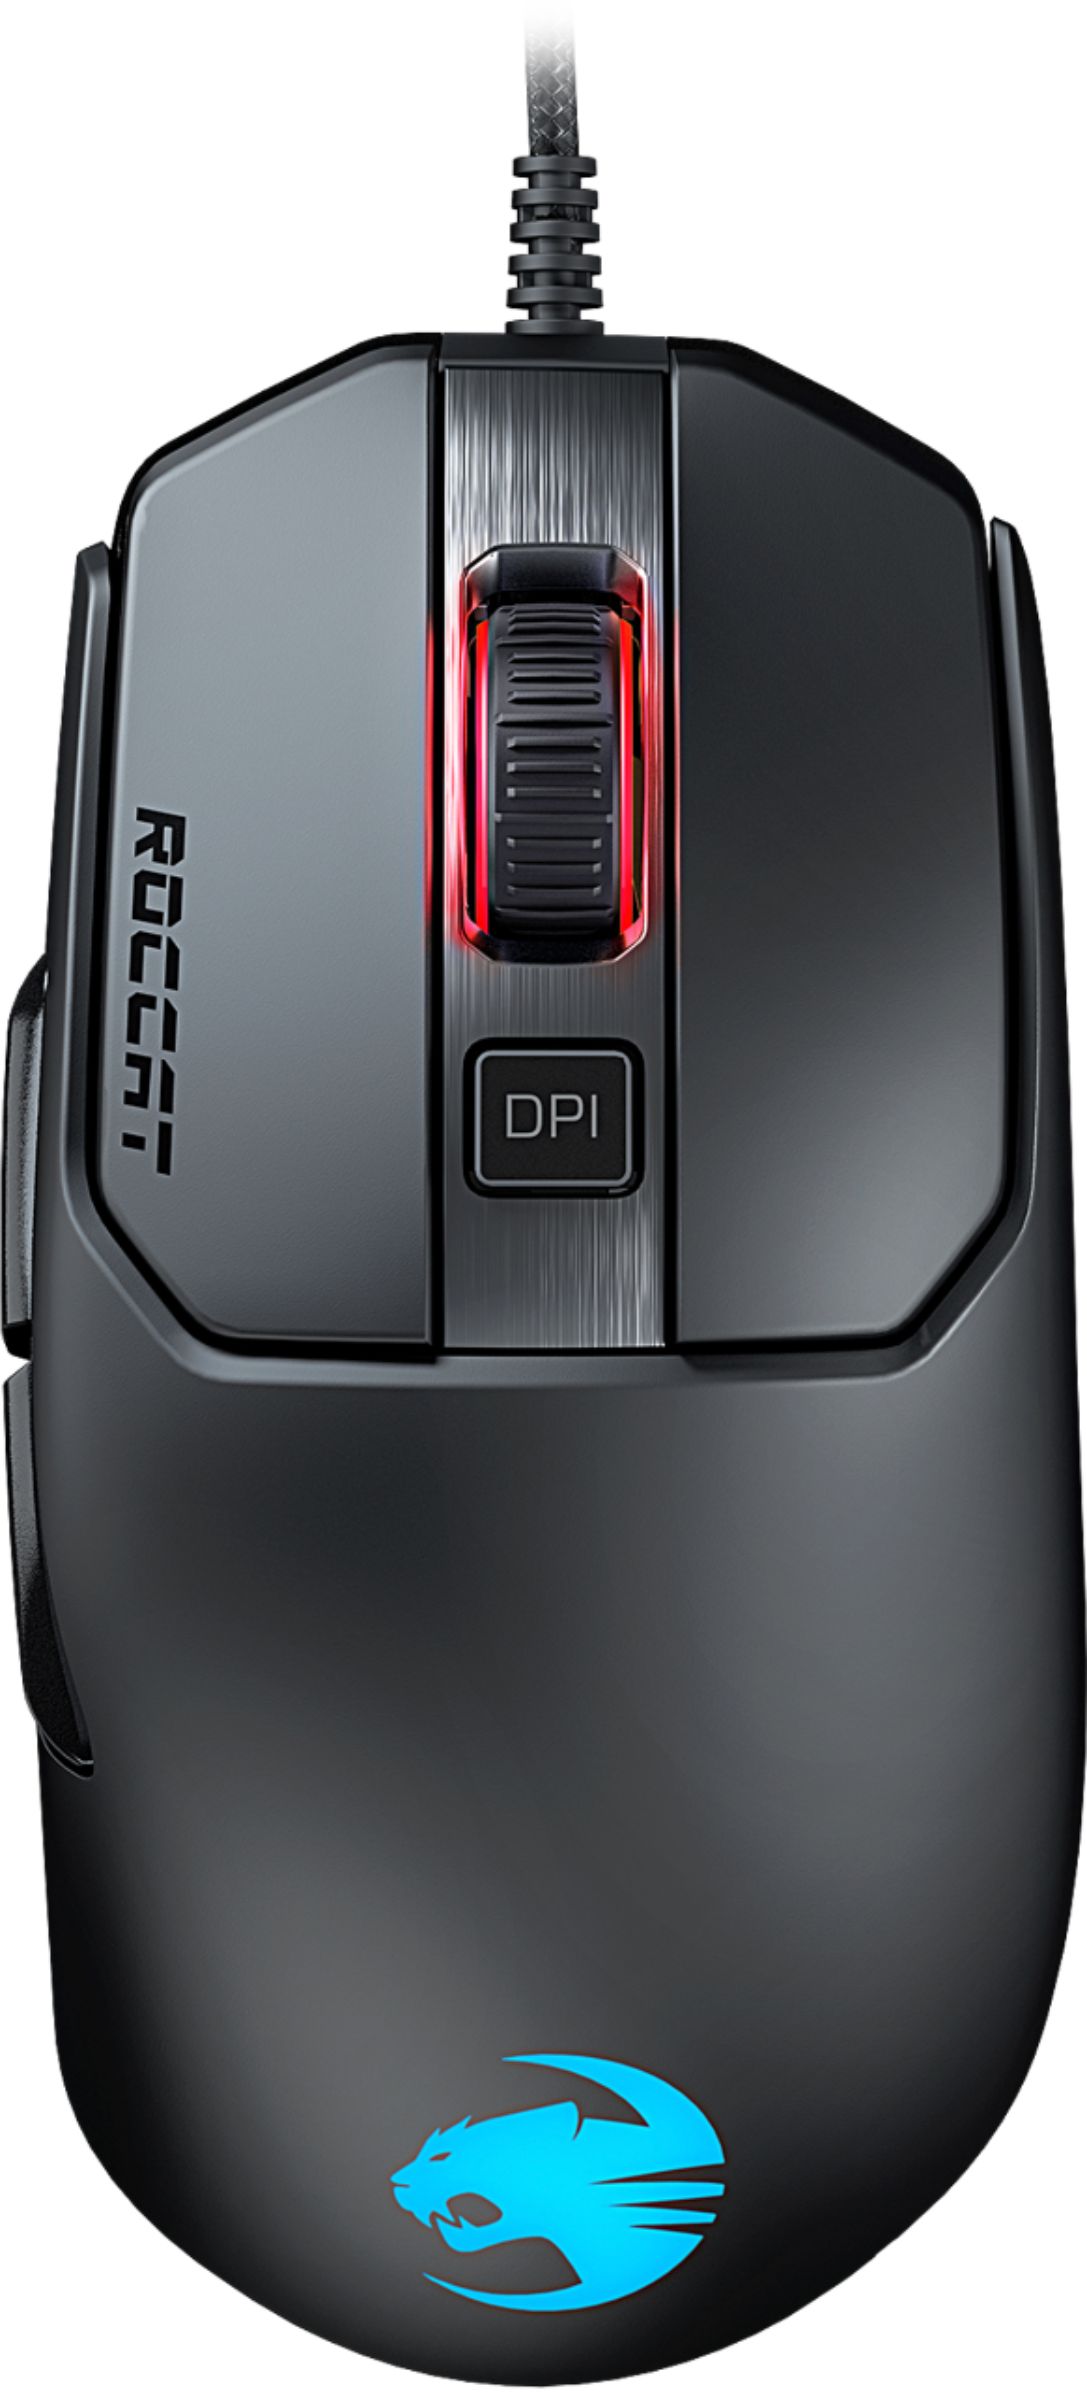 Gaming AIMO Mouse with Wired ROC-11-612-BK Lighting 120 Black Best Kain RGB Optical Buy: ROCCAT